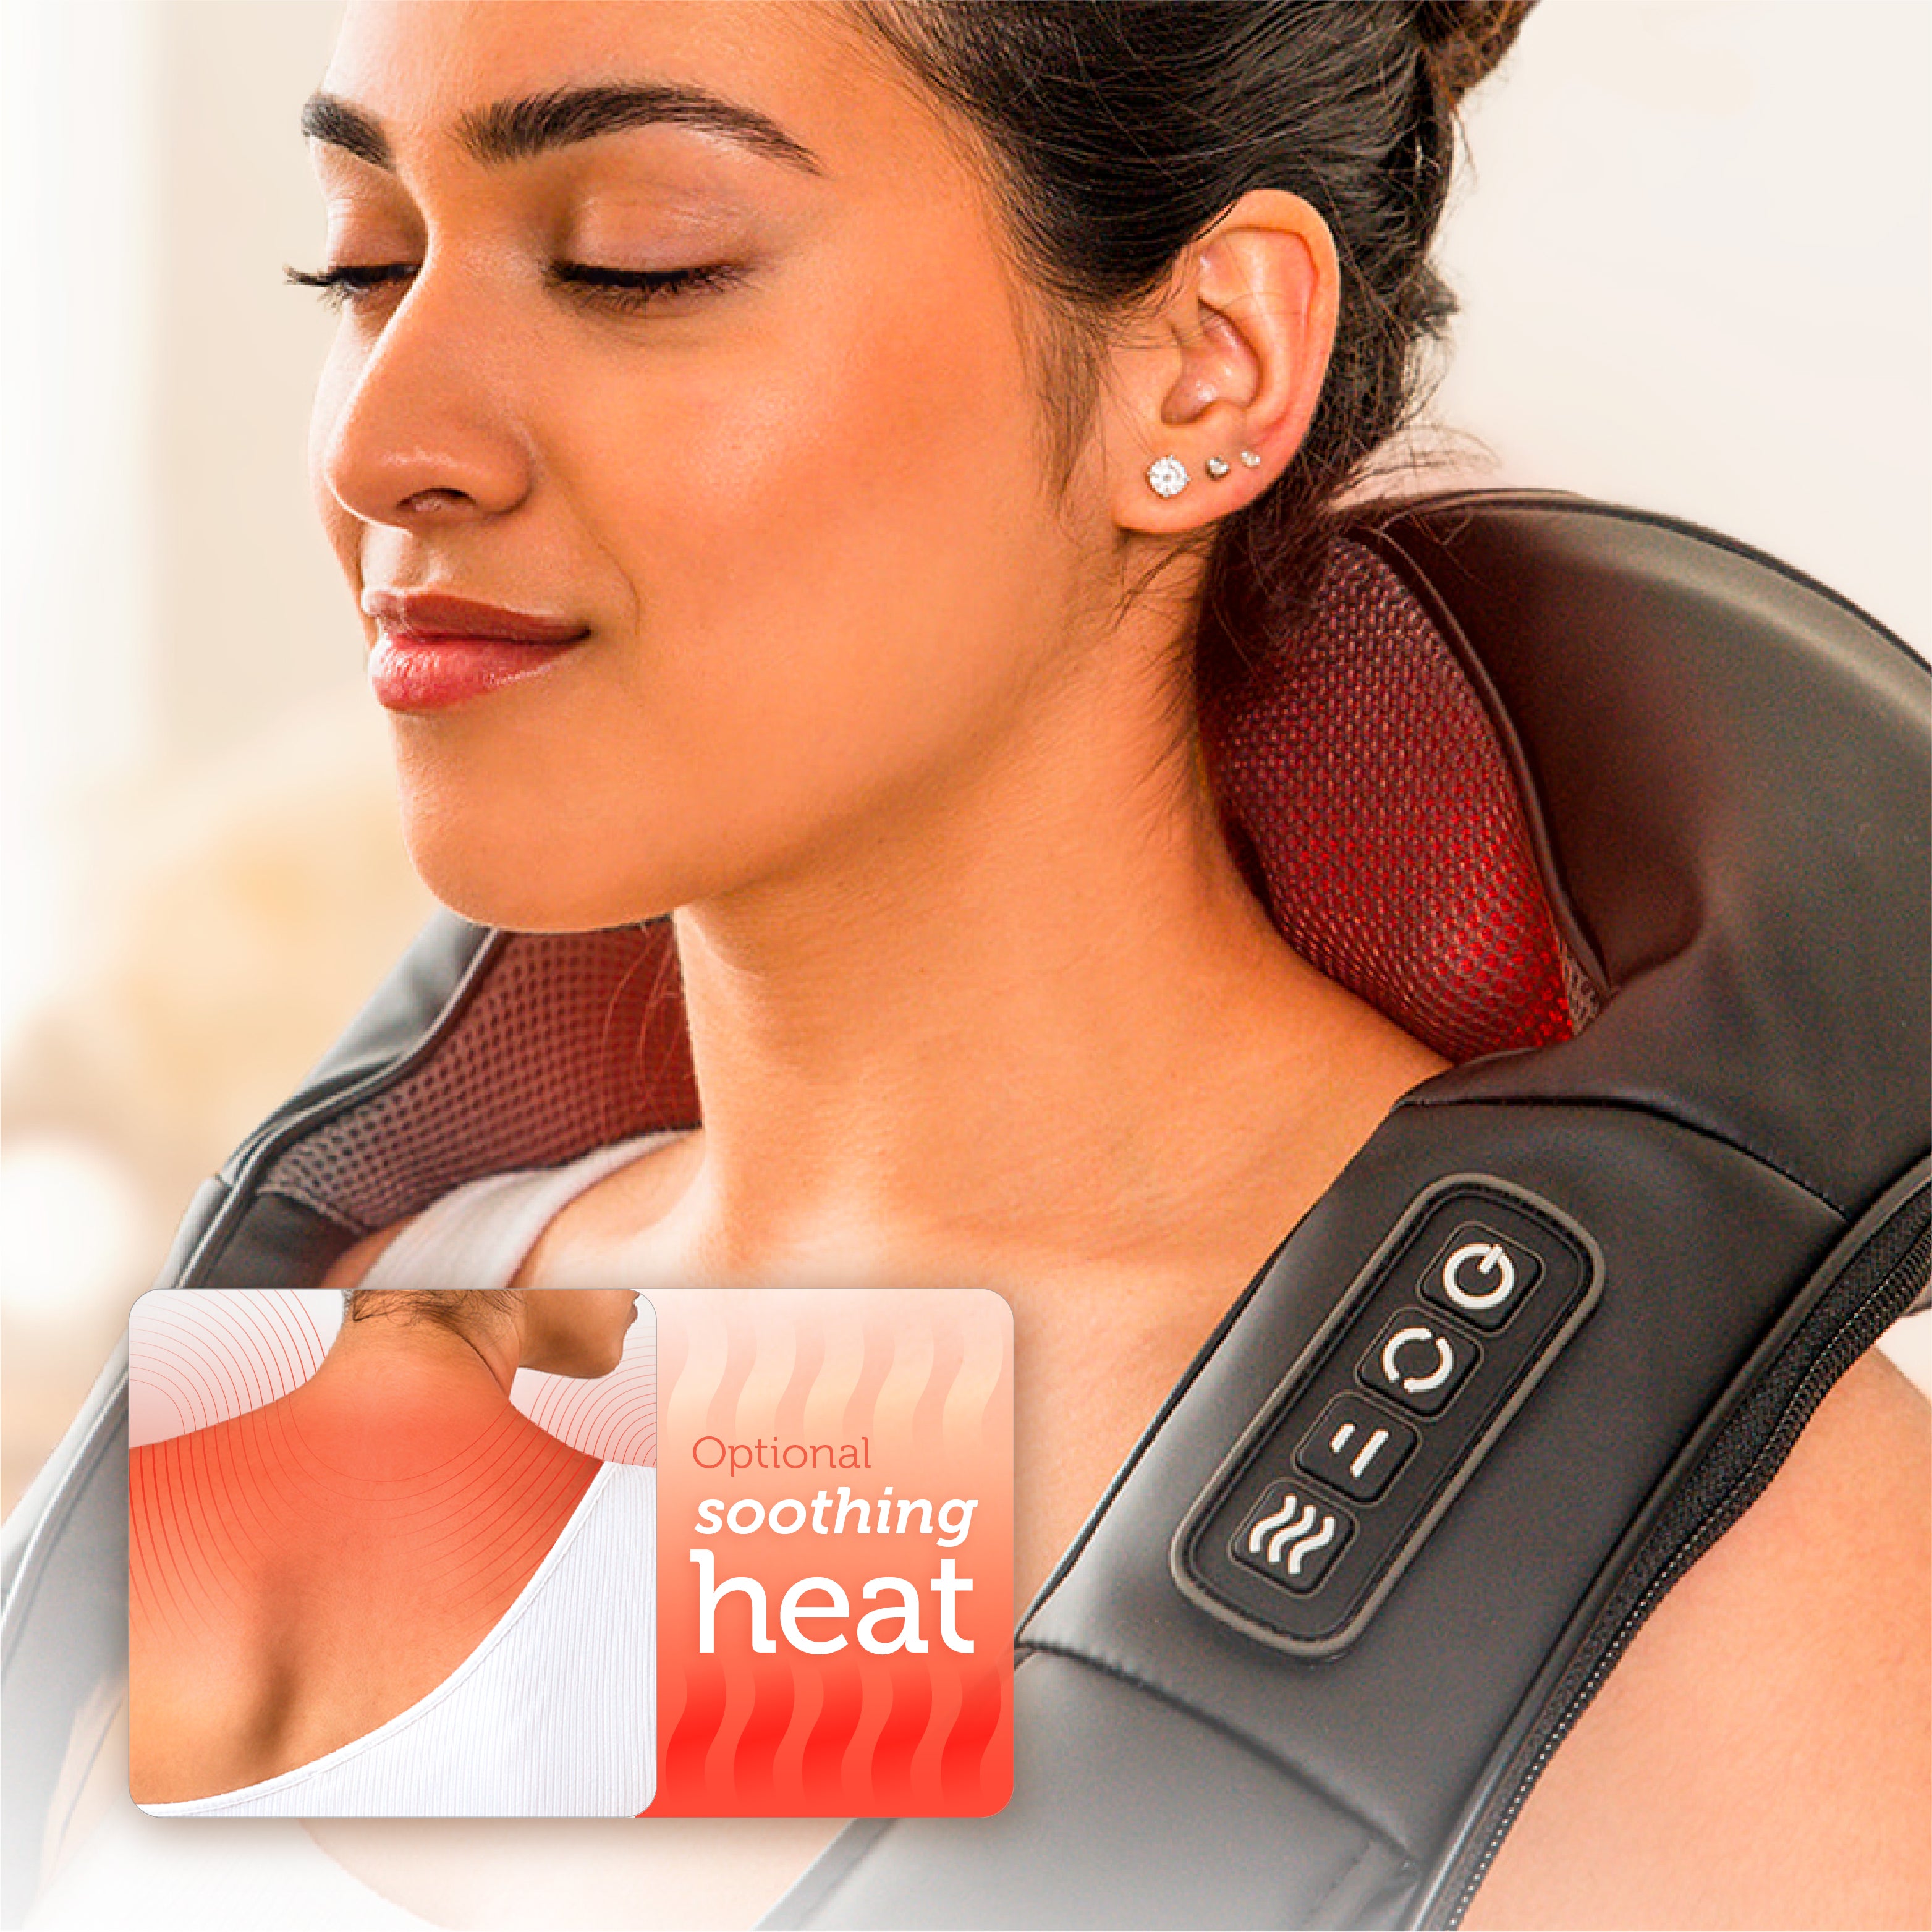  Shiatsu Neck and Back Massager - 8 Heated Rollers